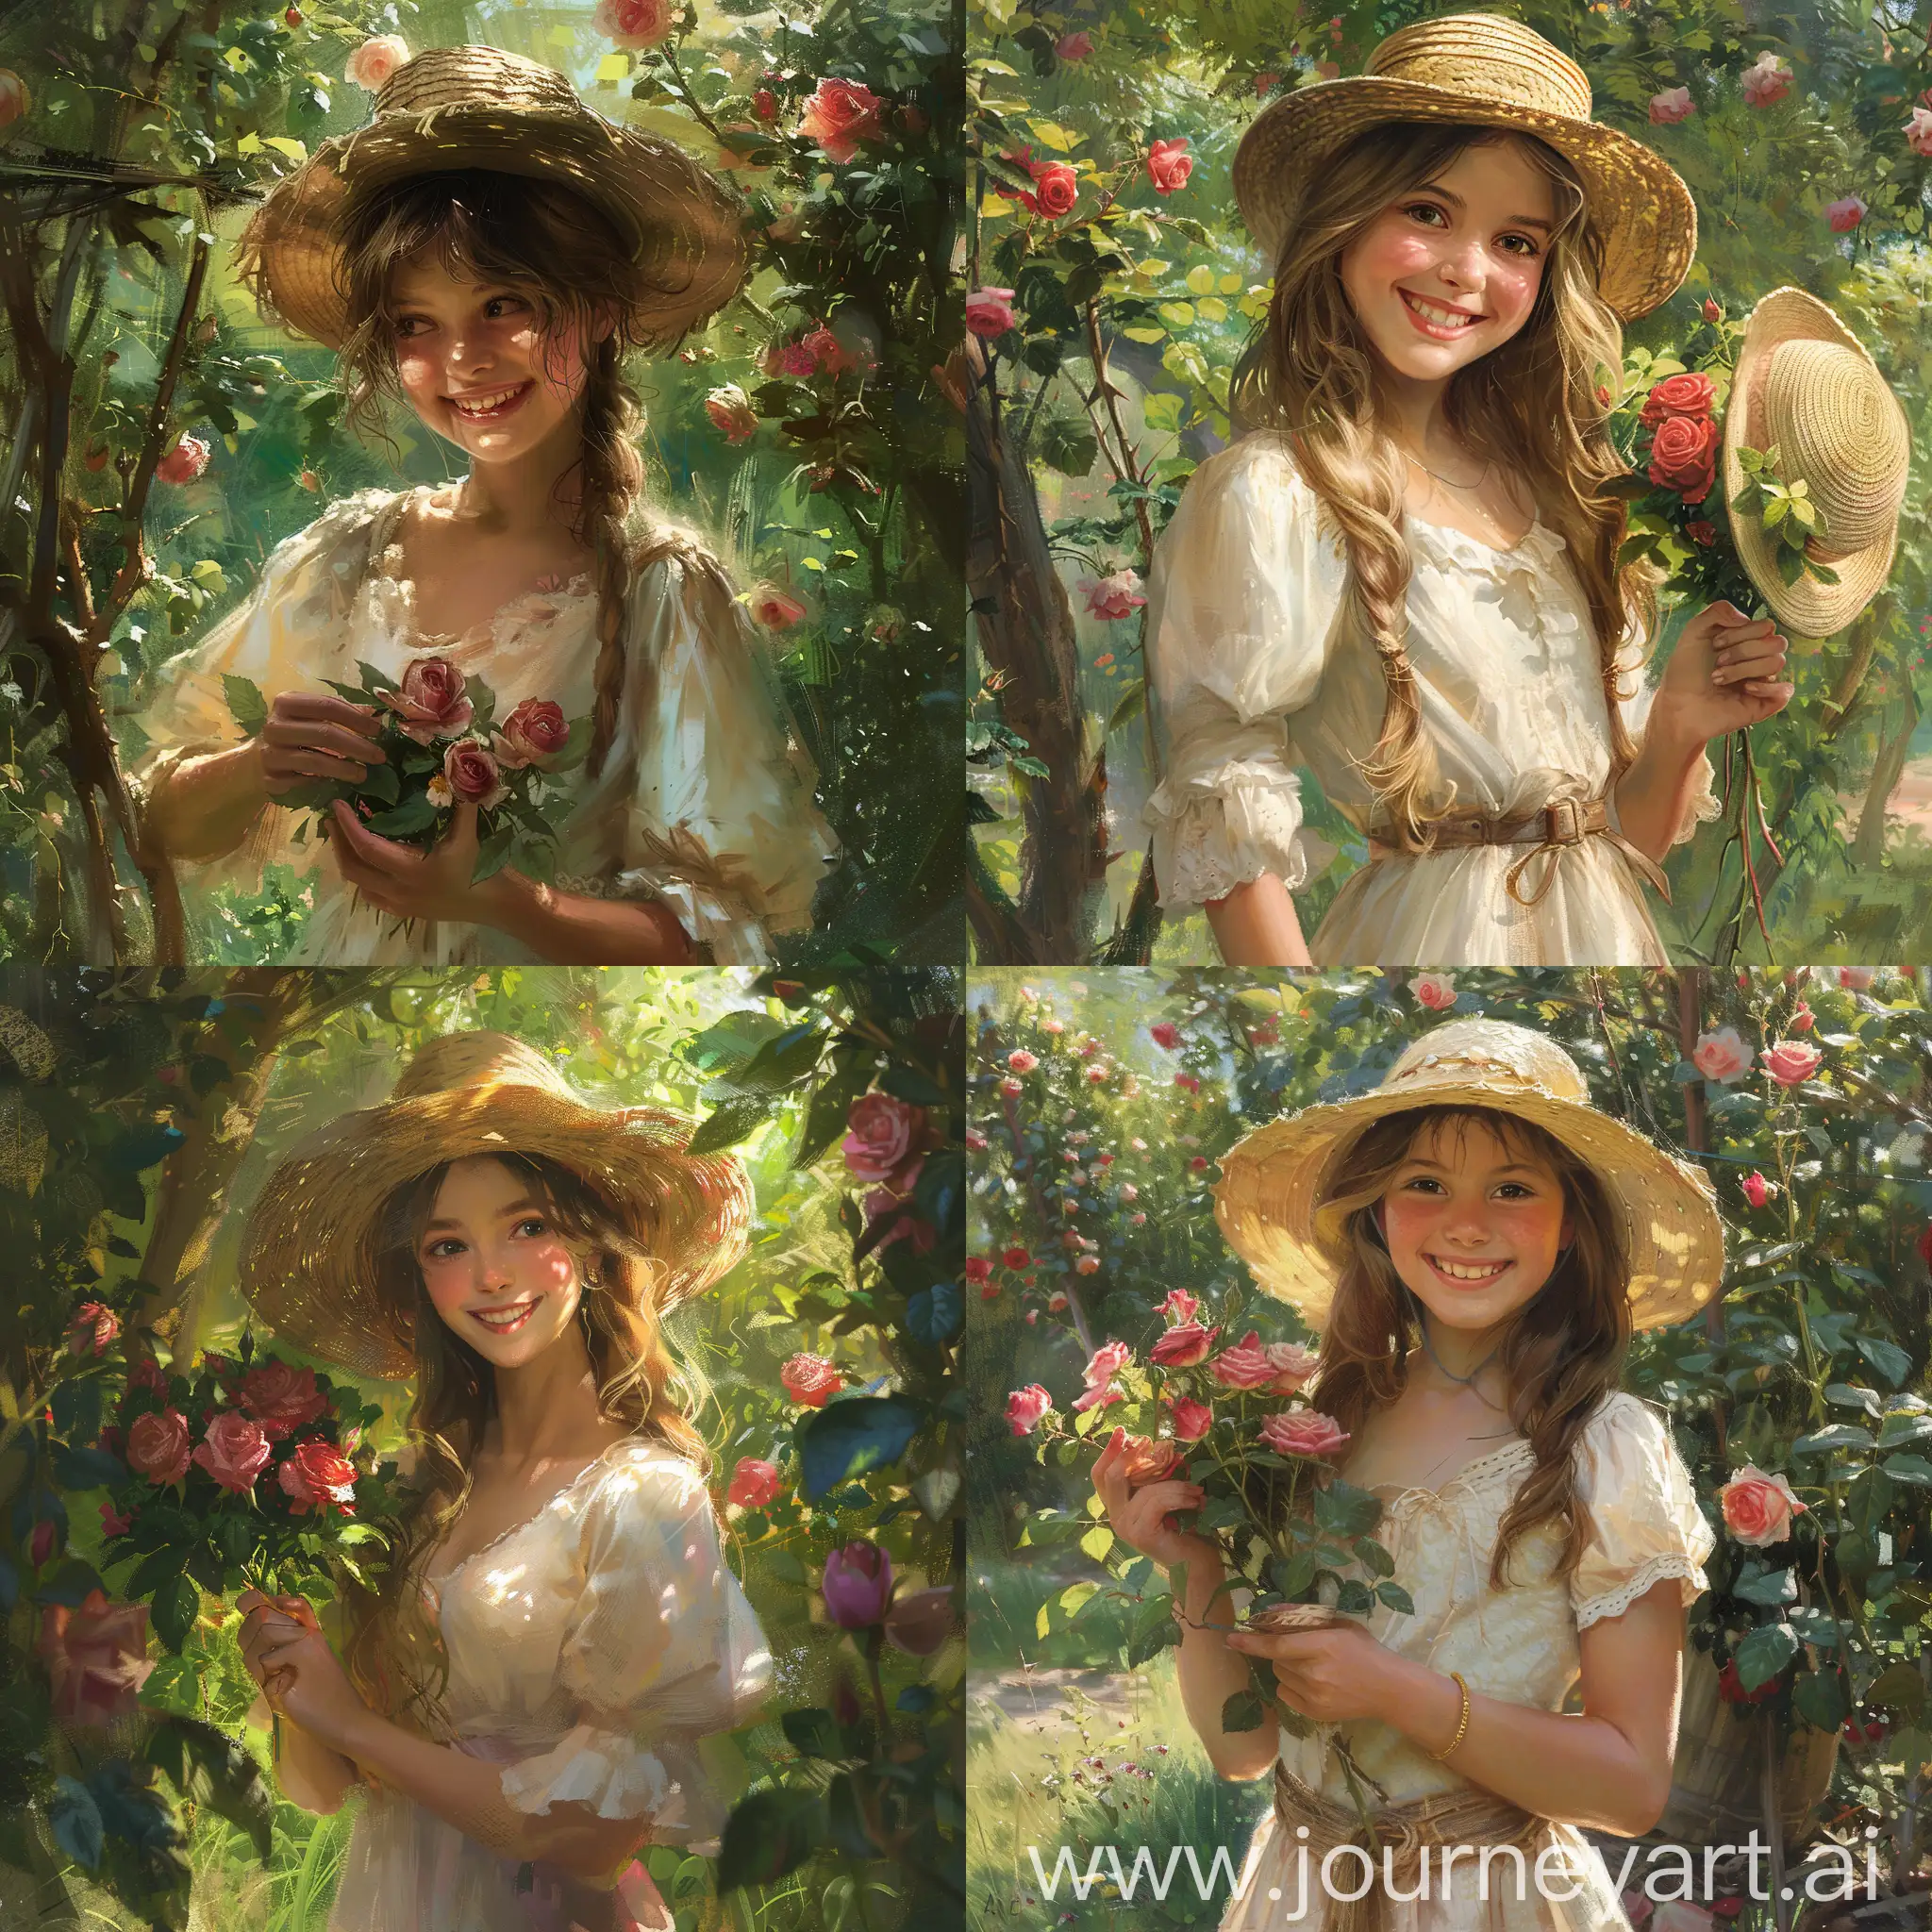 A fragile girl with a beautiful smile on her face, holding a palm of roses, stands in the garden. And she put her straw hat on.